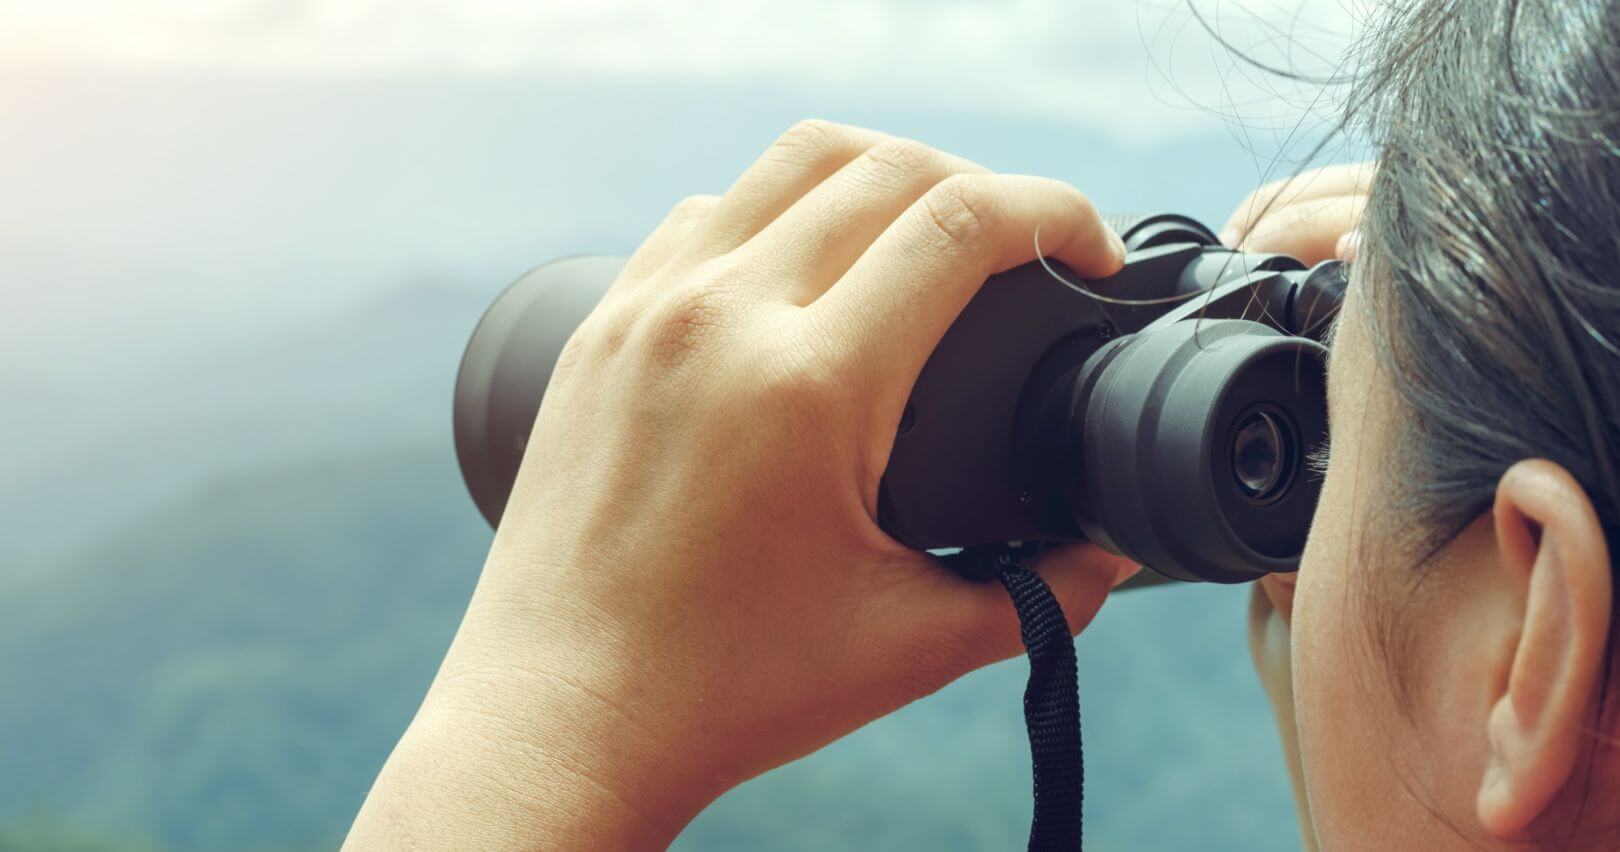 Photograph of a person using binoculars